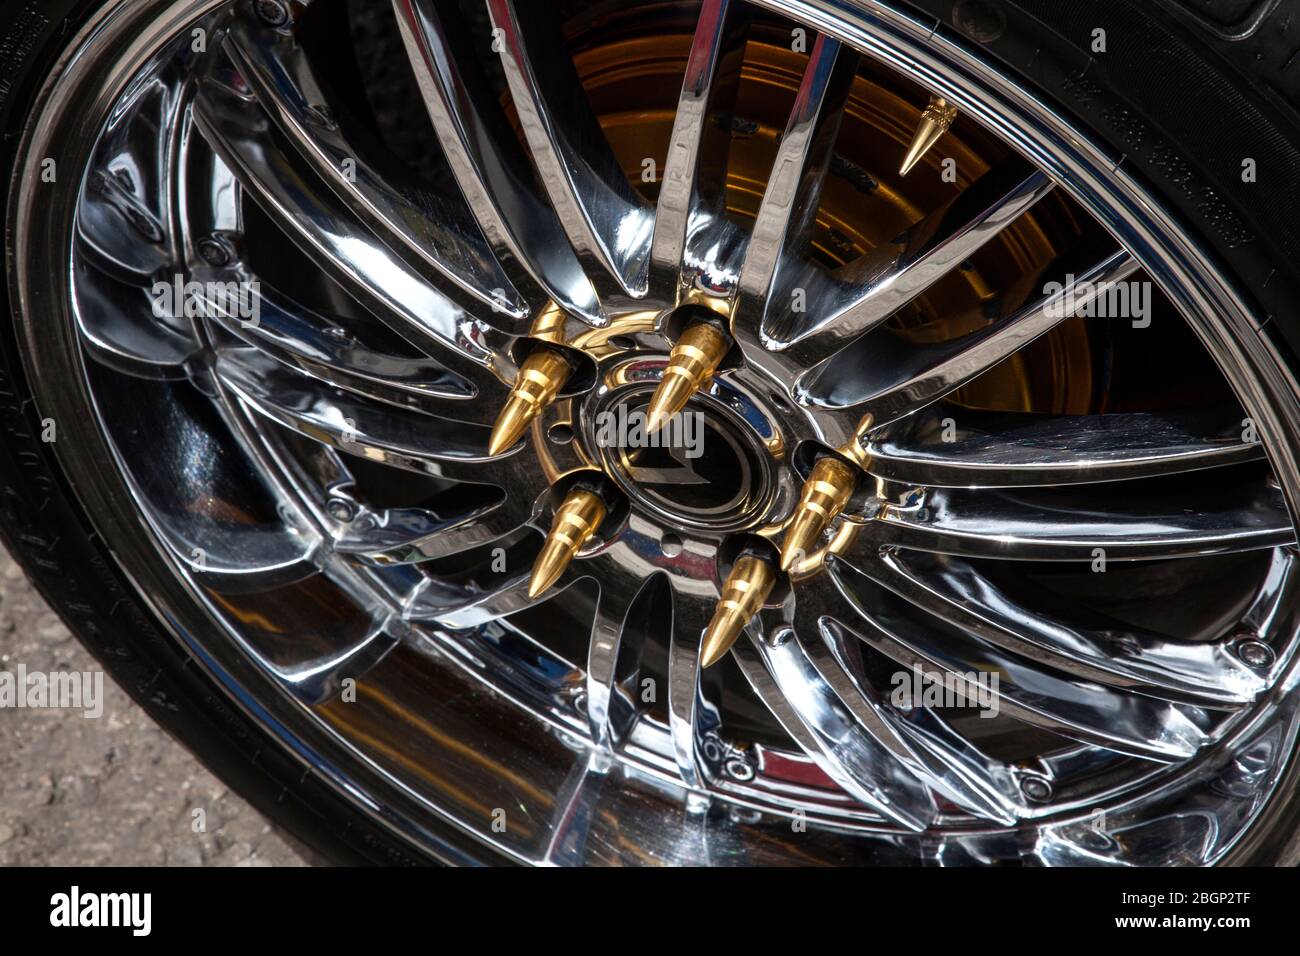 Flashy alloy customised wheel trim with gold bullets nut caps on a car fit for a drug baron or gangster in Bogota, Colombia? Stock Photo